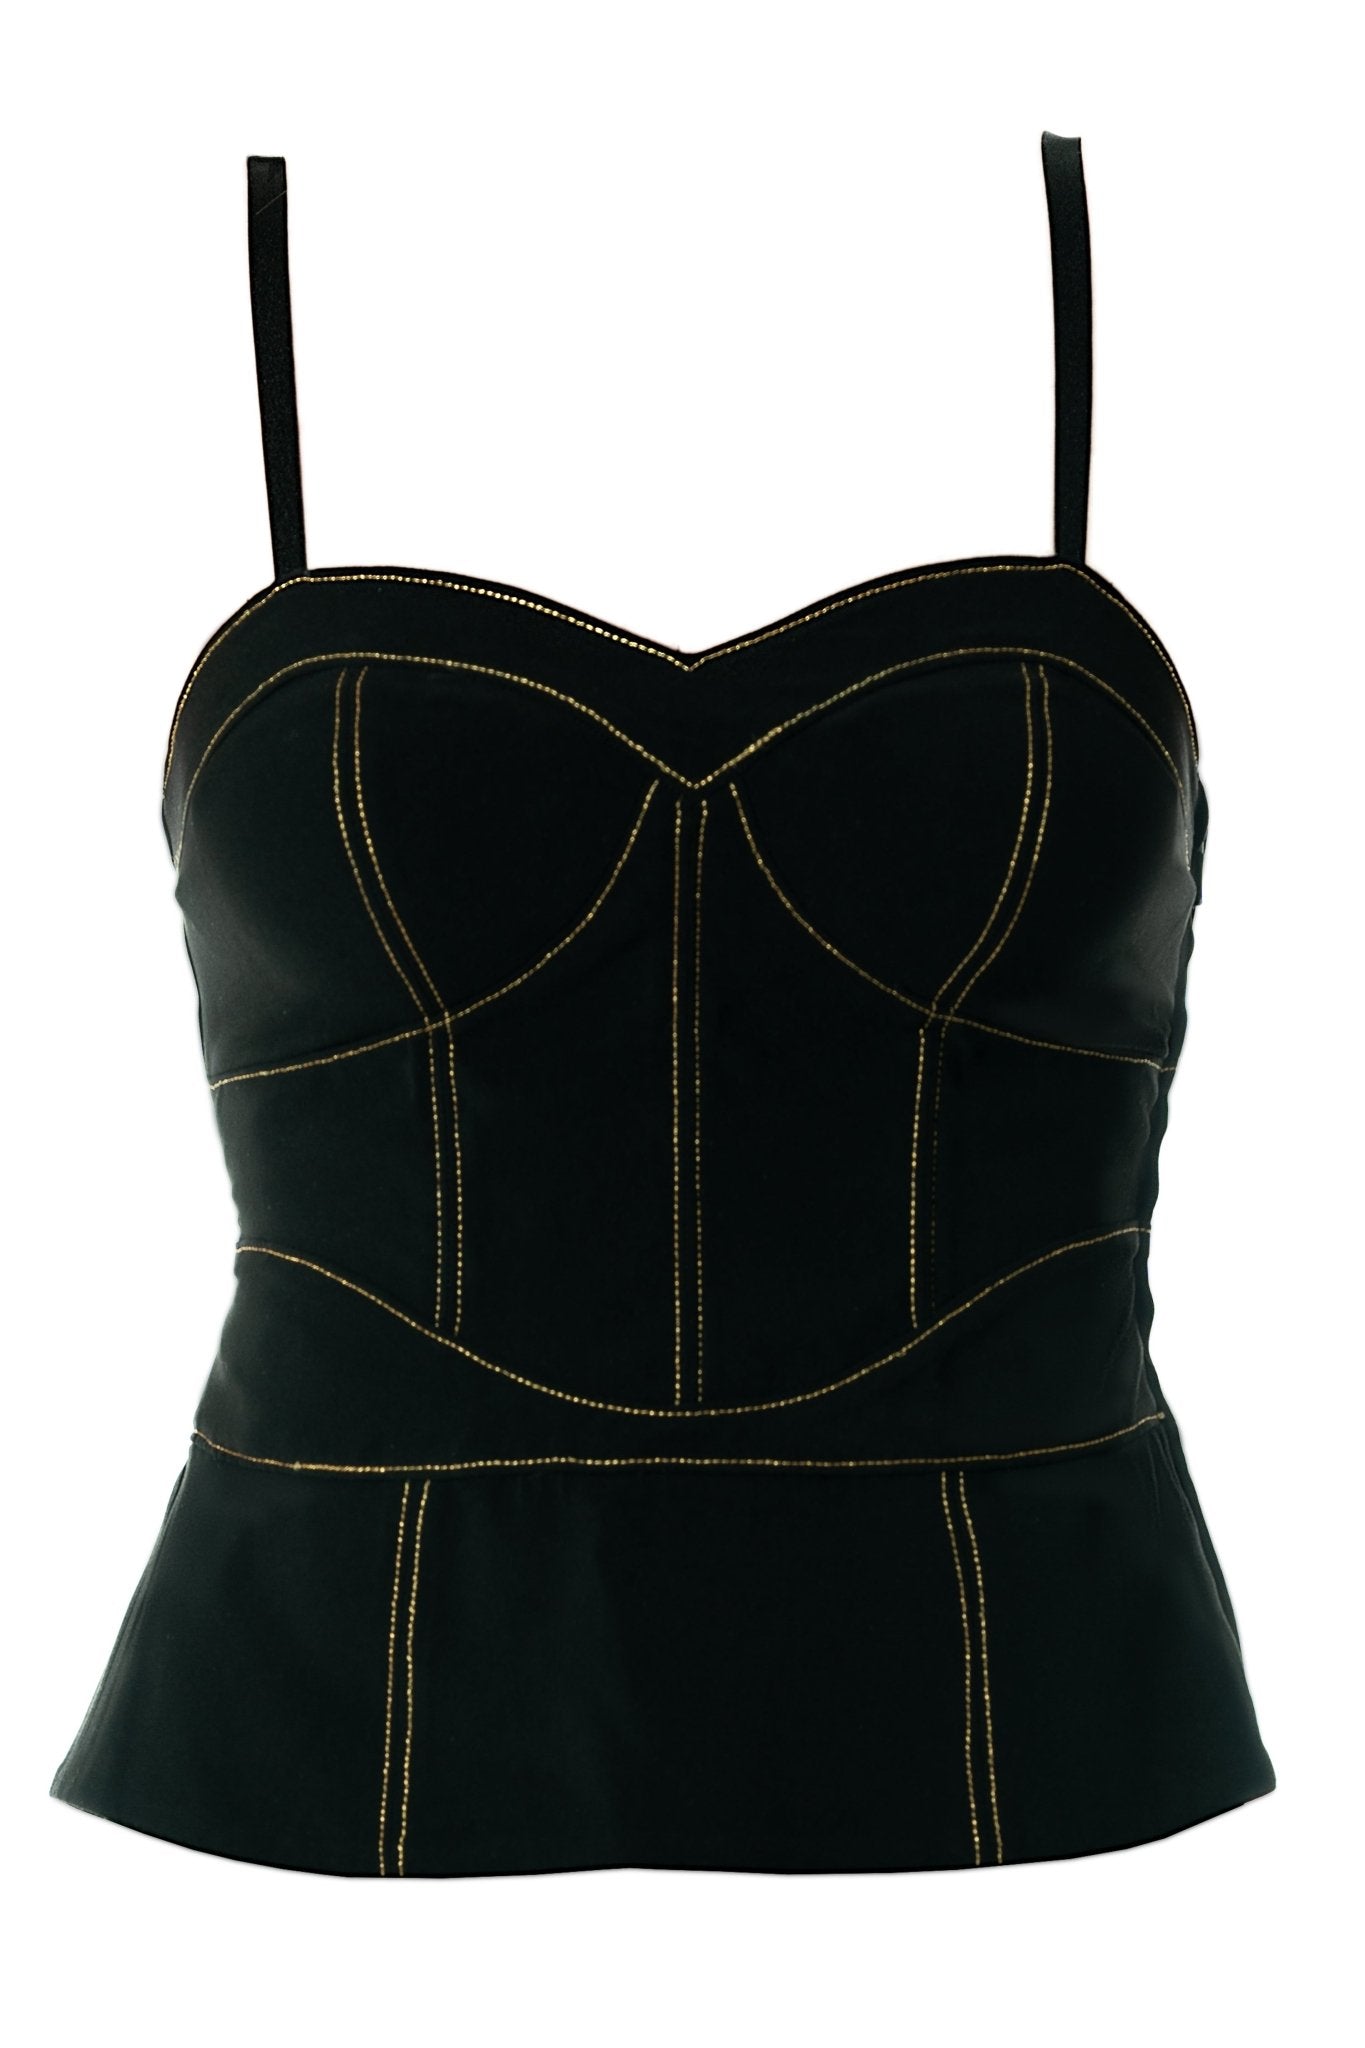 TORI Bustier Corset Uniform Top for gaming, casino, hotel, restaurants, hospitality, and resorts. Black corset uniform with gold top stitch details and built in support. - KAPTVA Apparel